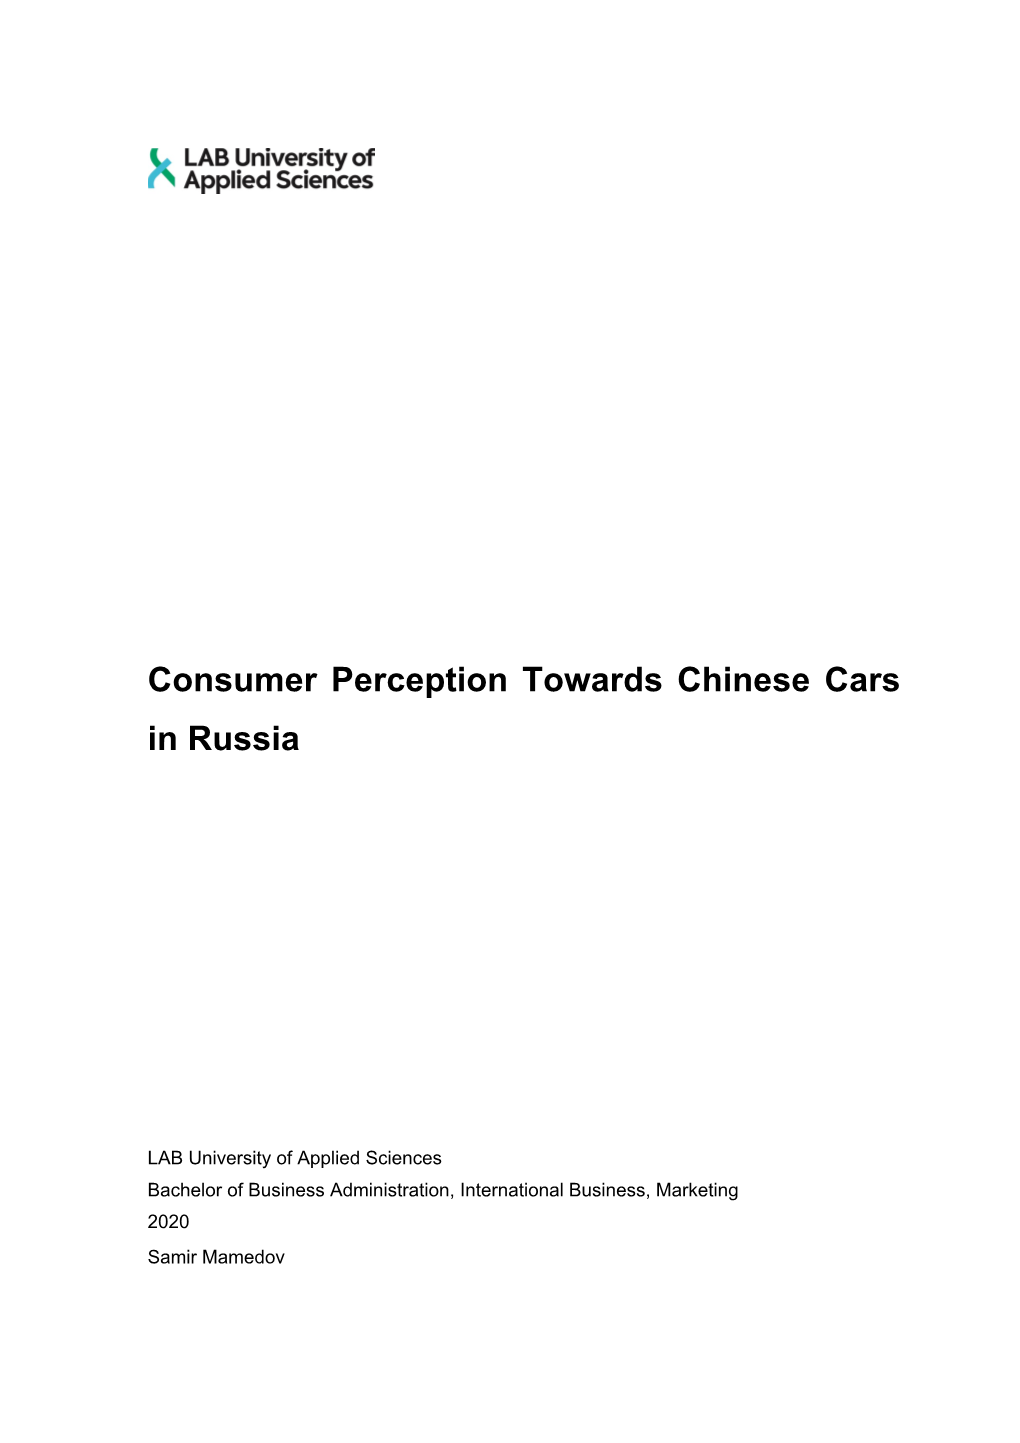 Consumer Perception Towards Chinese Cars in Russia